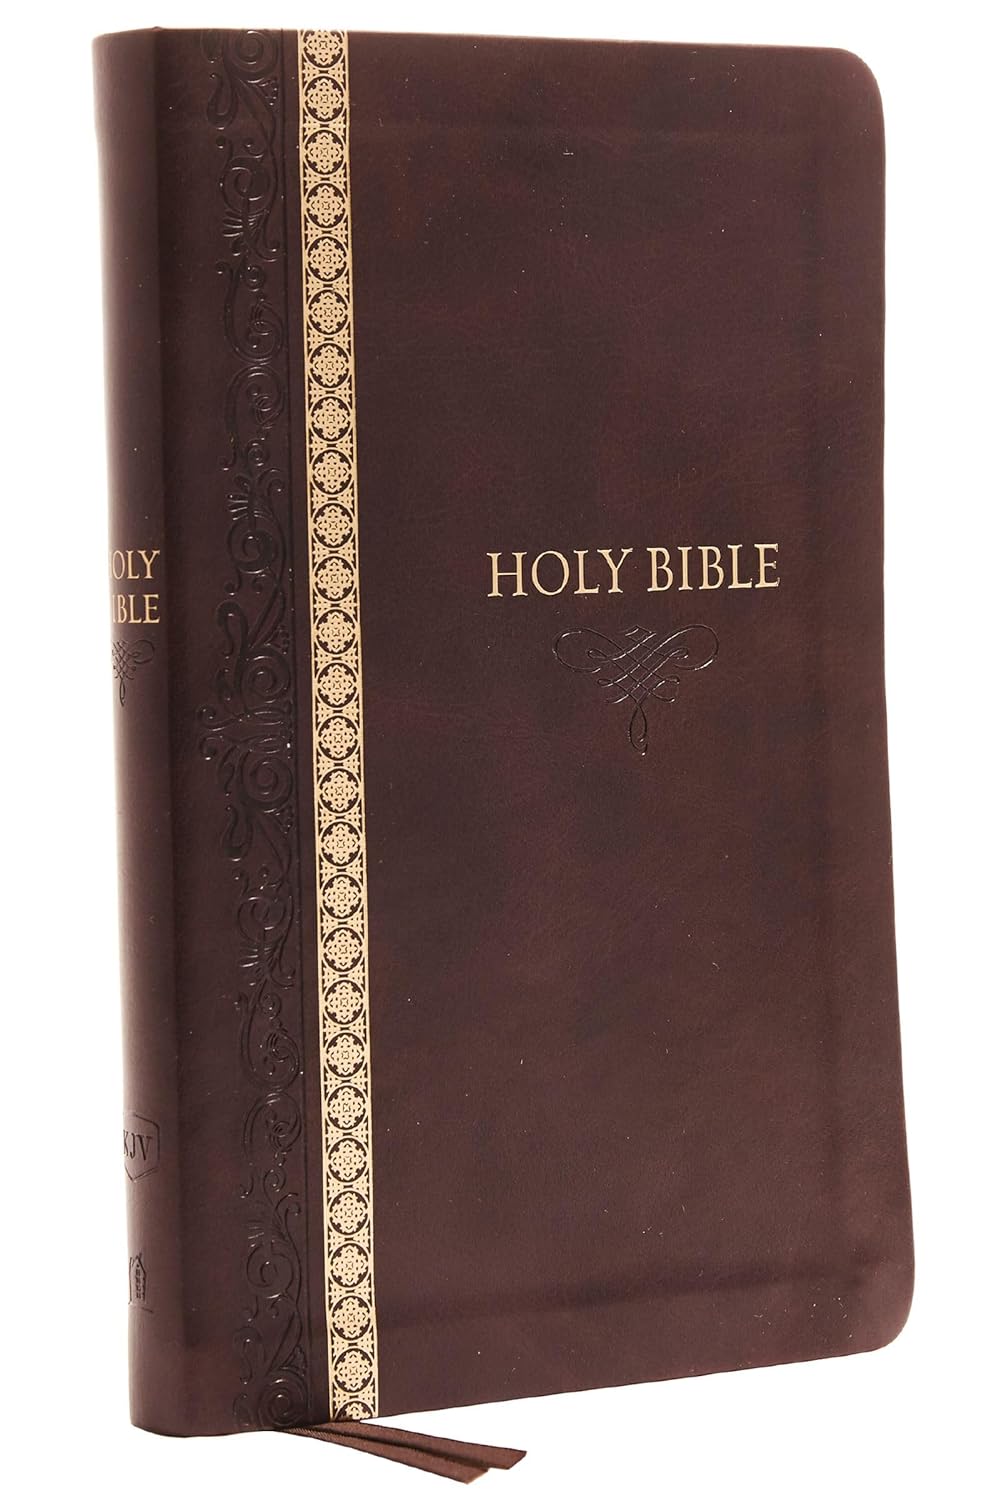 KJV Holy Bible : Thinline Brown Leather Soft